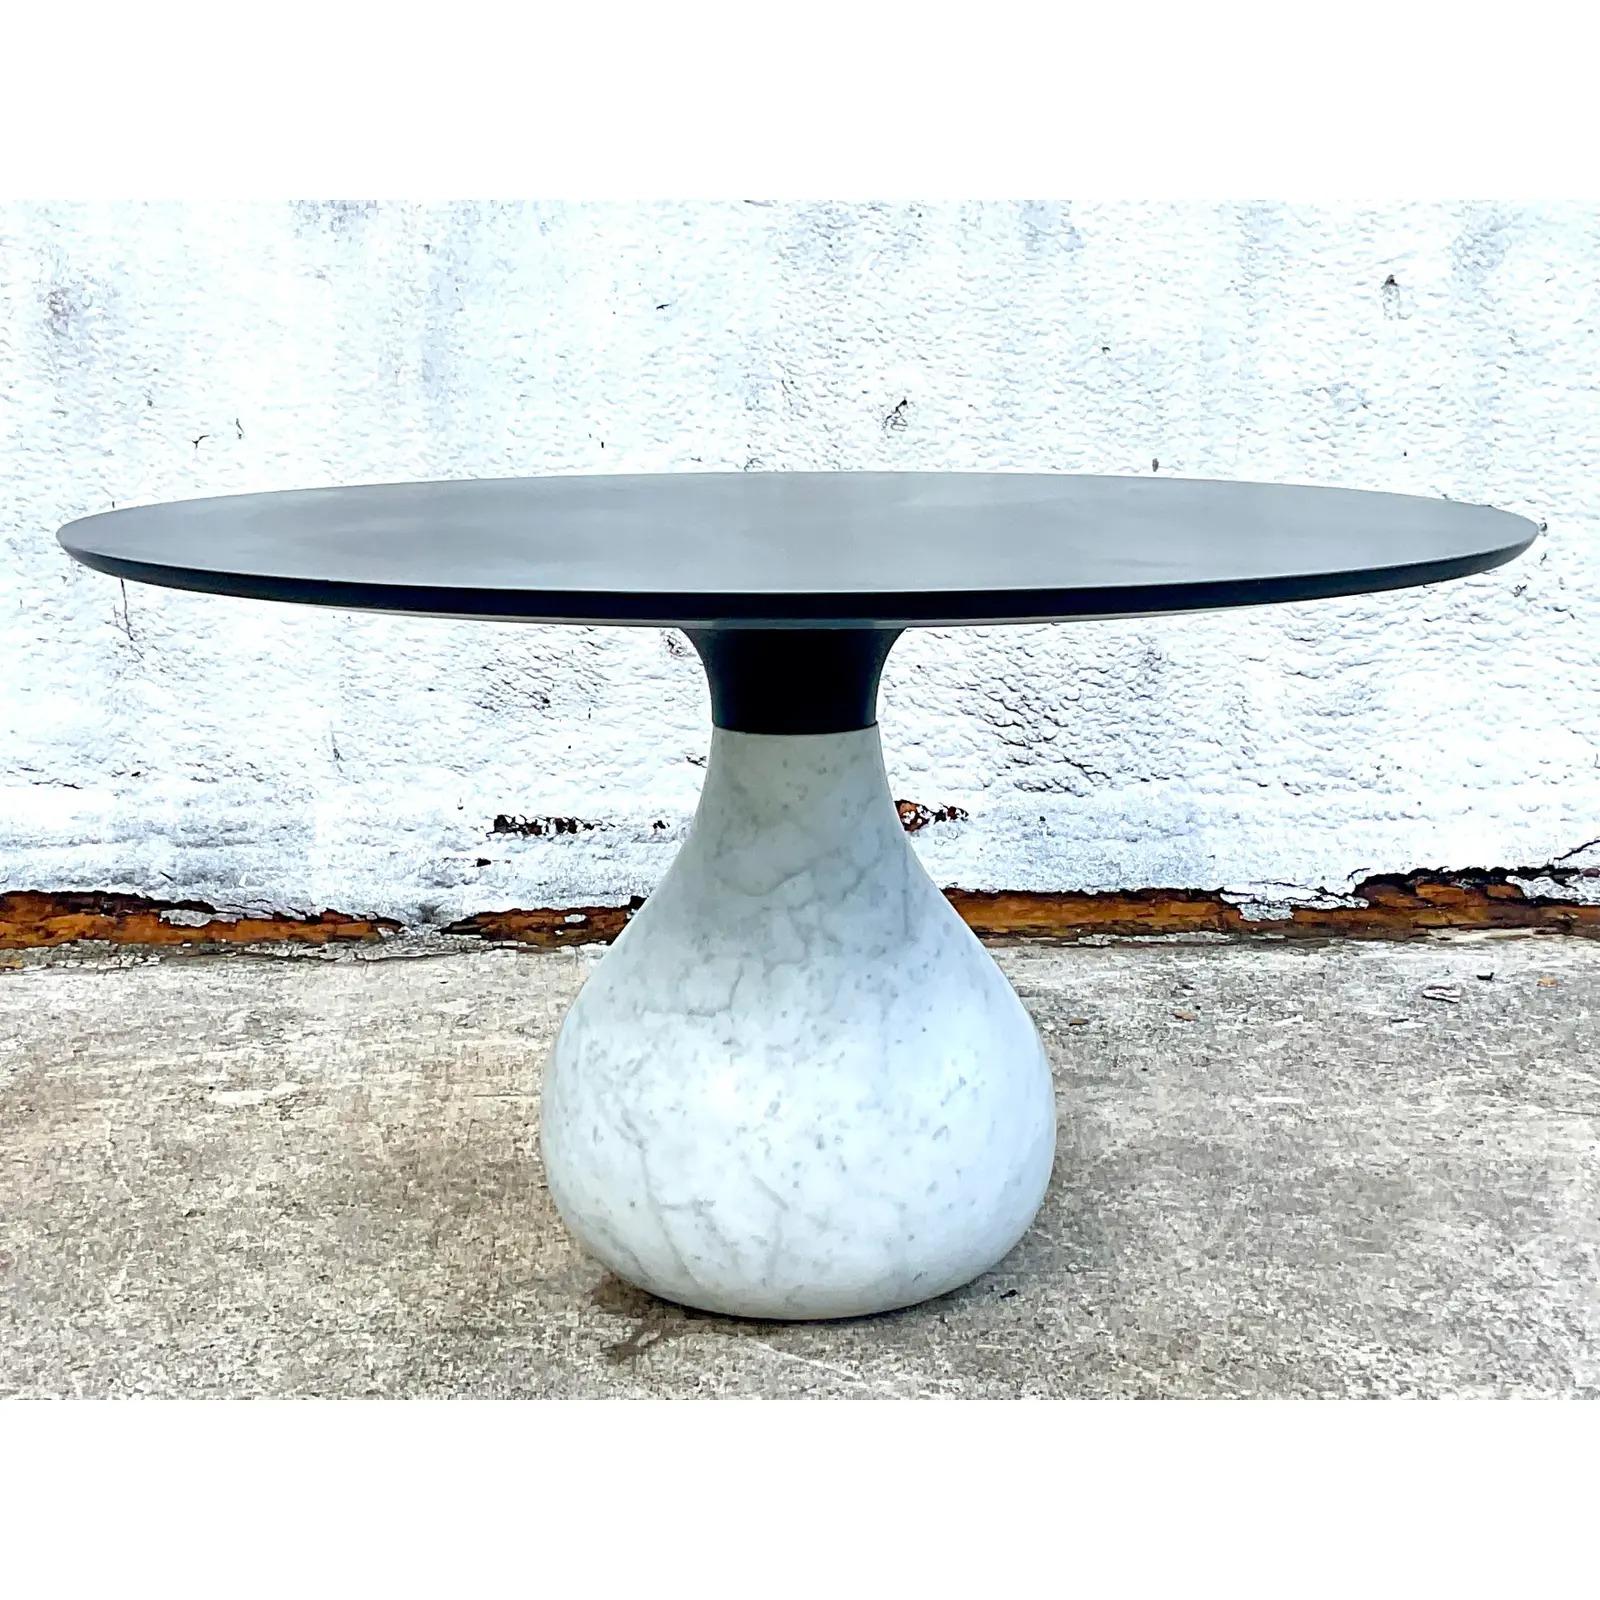 An incredible vintage Contemporary dining table. Made by the iconic Roche Bobois group. Beautiful matte Carrera marble base in a tear drop shape. Marked on the bottom. Acquired from a Palm Beach estate.